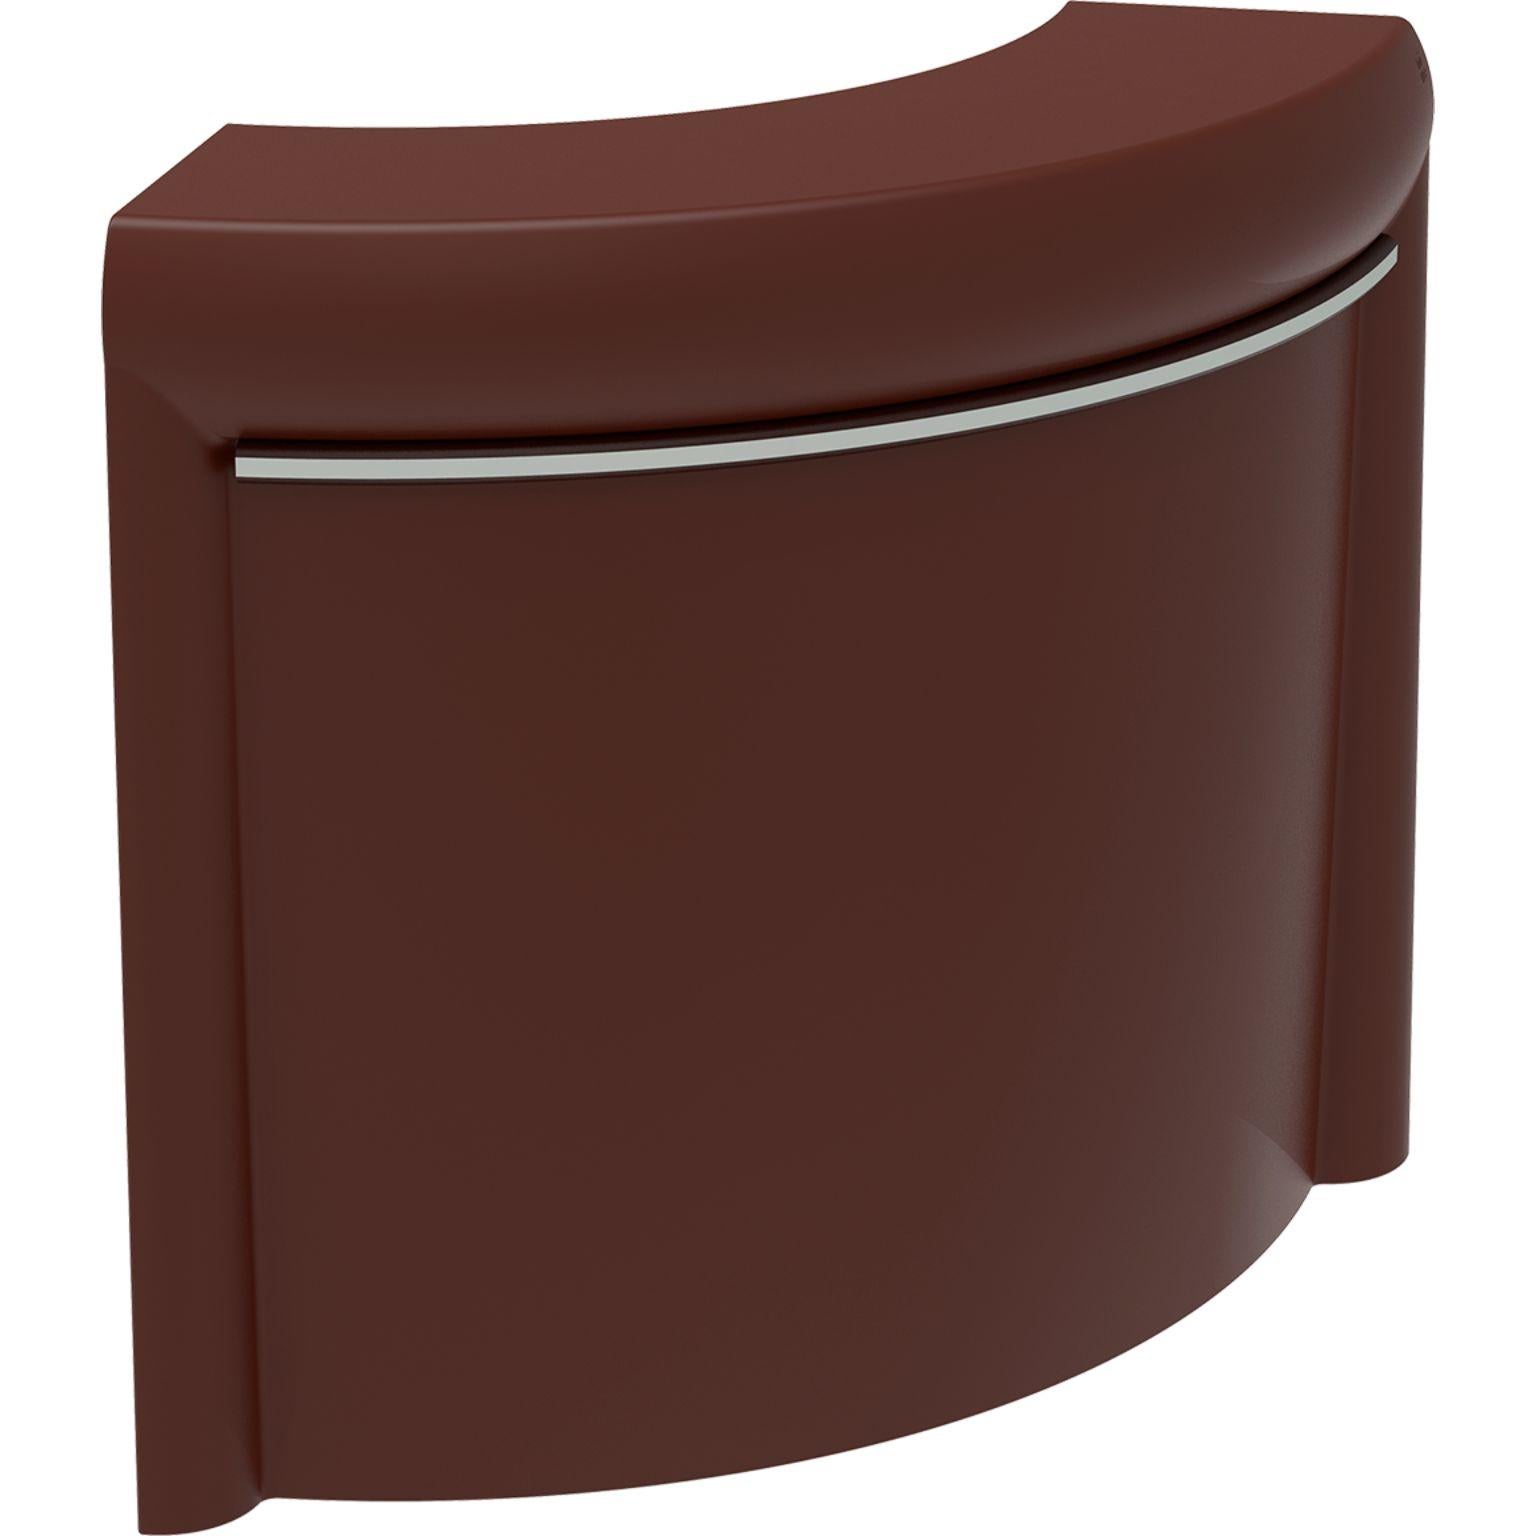 Curved chocolate lacquered classe bar by MOWEE
Dimensions: D100 x W100 x H115 cm
Material: Polyethylene and stainless steel.
Weight: 31 kg
Also available in different colors, wheel kit optional, bar union kit optional, LED Lighting optional.